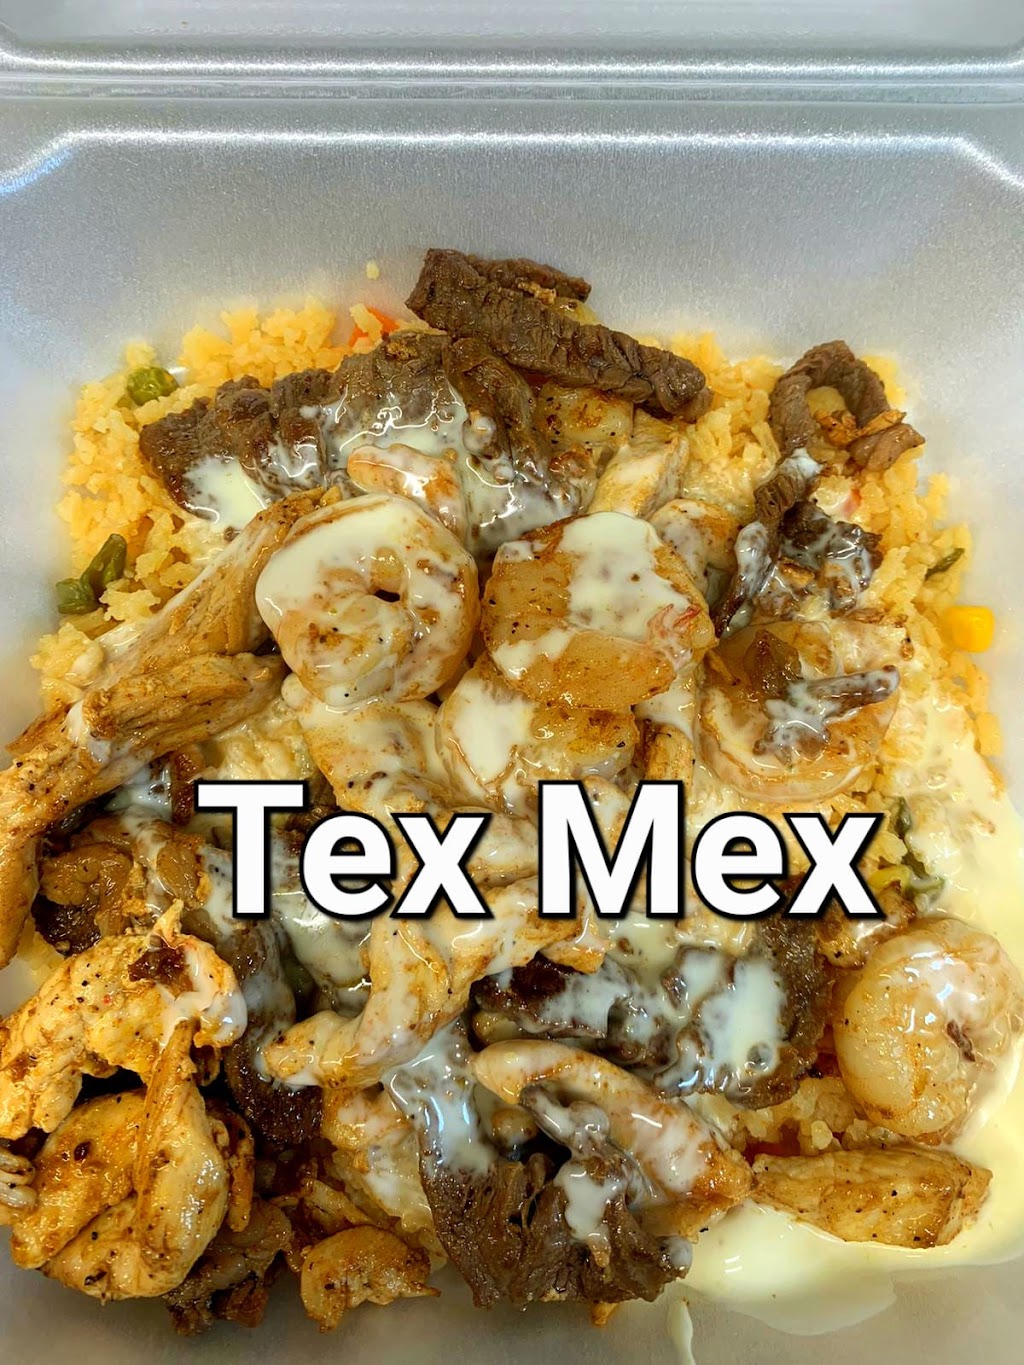 La Fiesta Mexicana Supermarket and mexican food | 110 East Ave, Seagrove, NC 27341, USA | Phone: (336) 872-4050